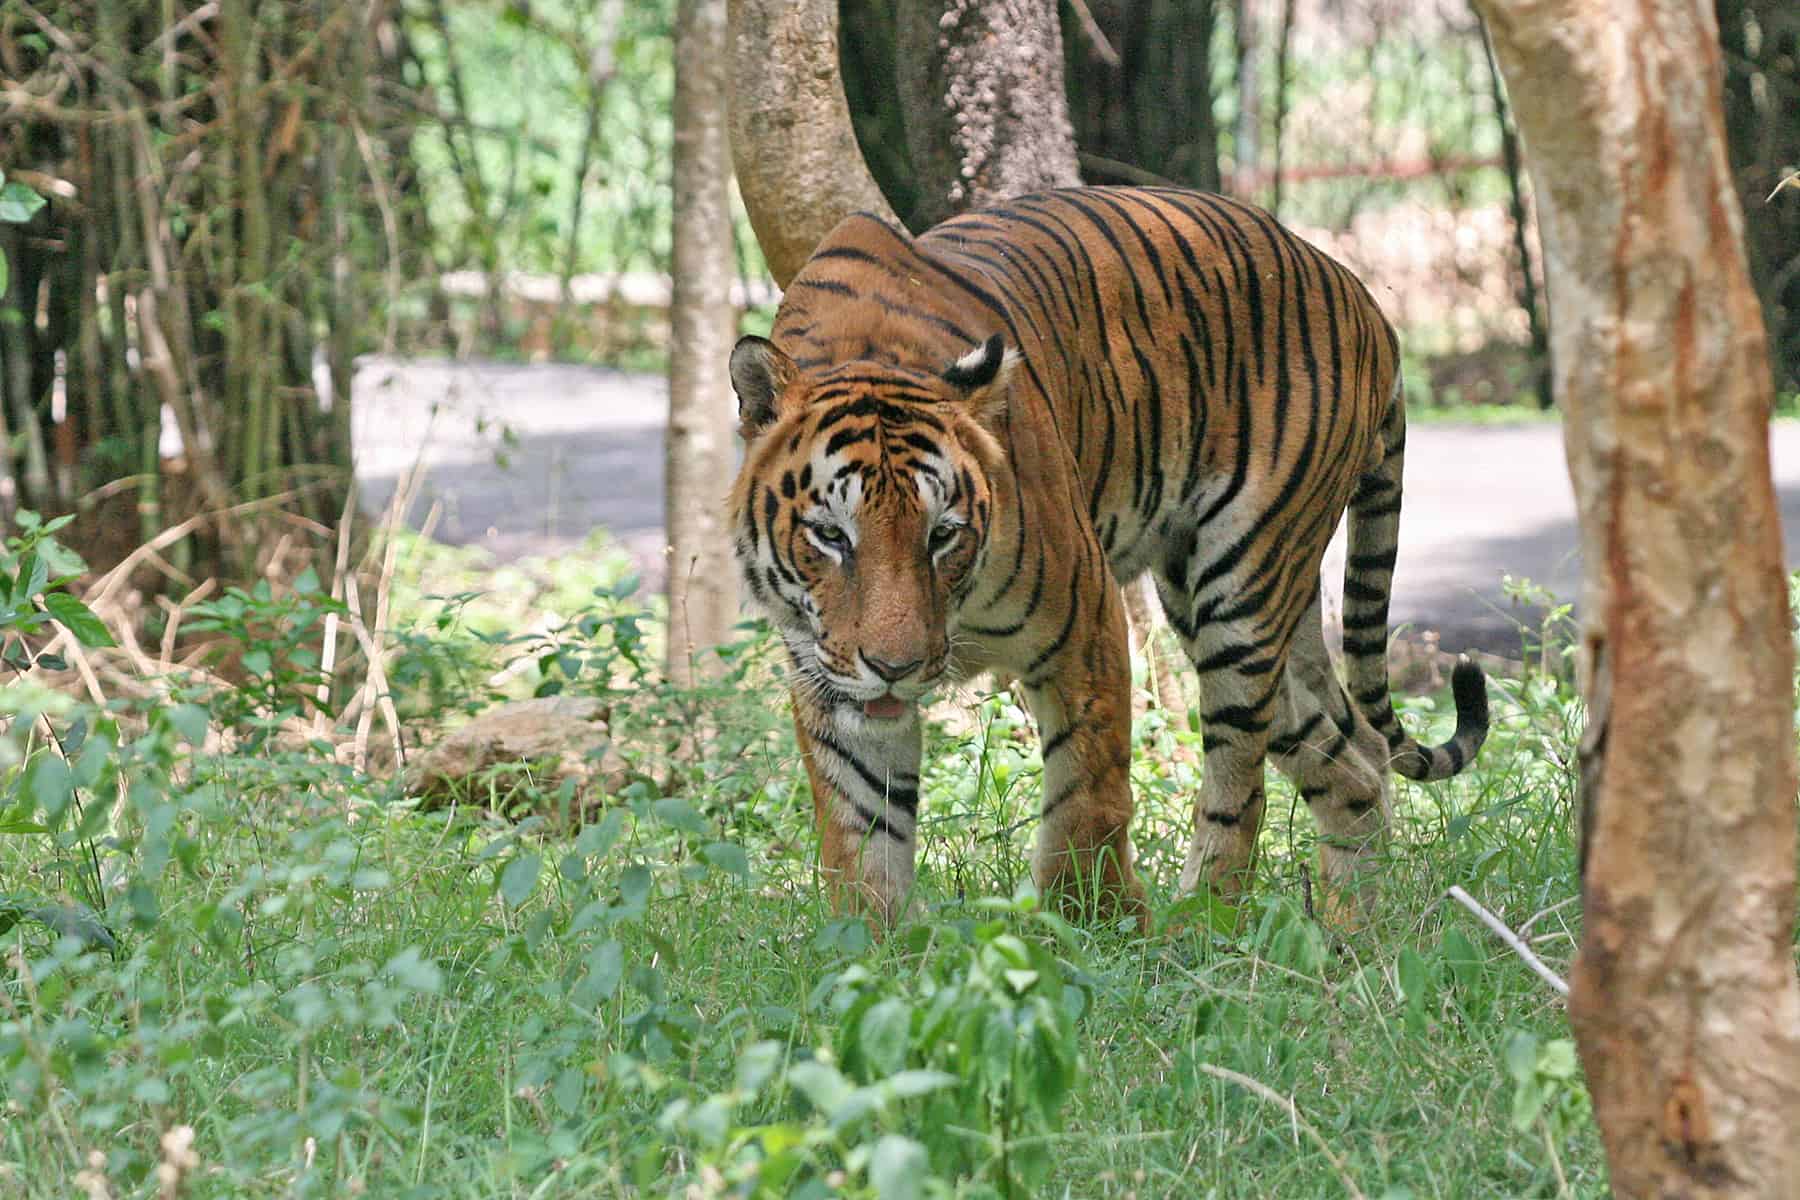 A Bengal tiger in Bannerghatta National park in Bangalore